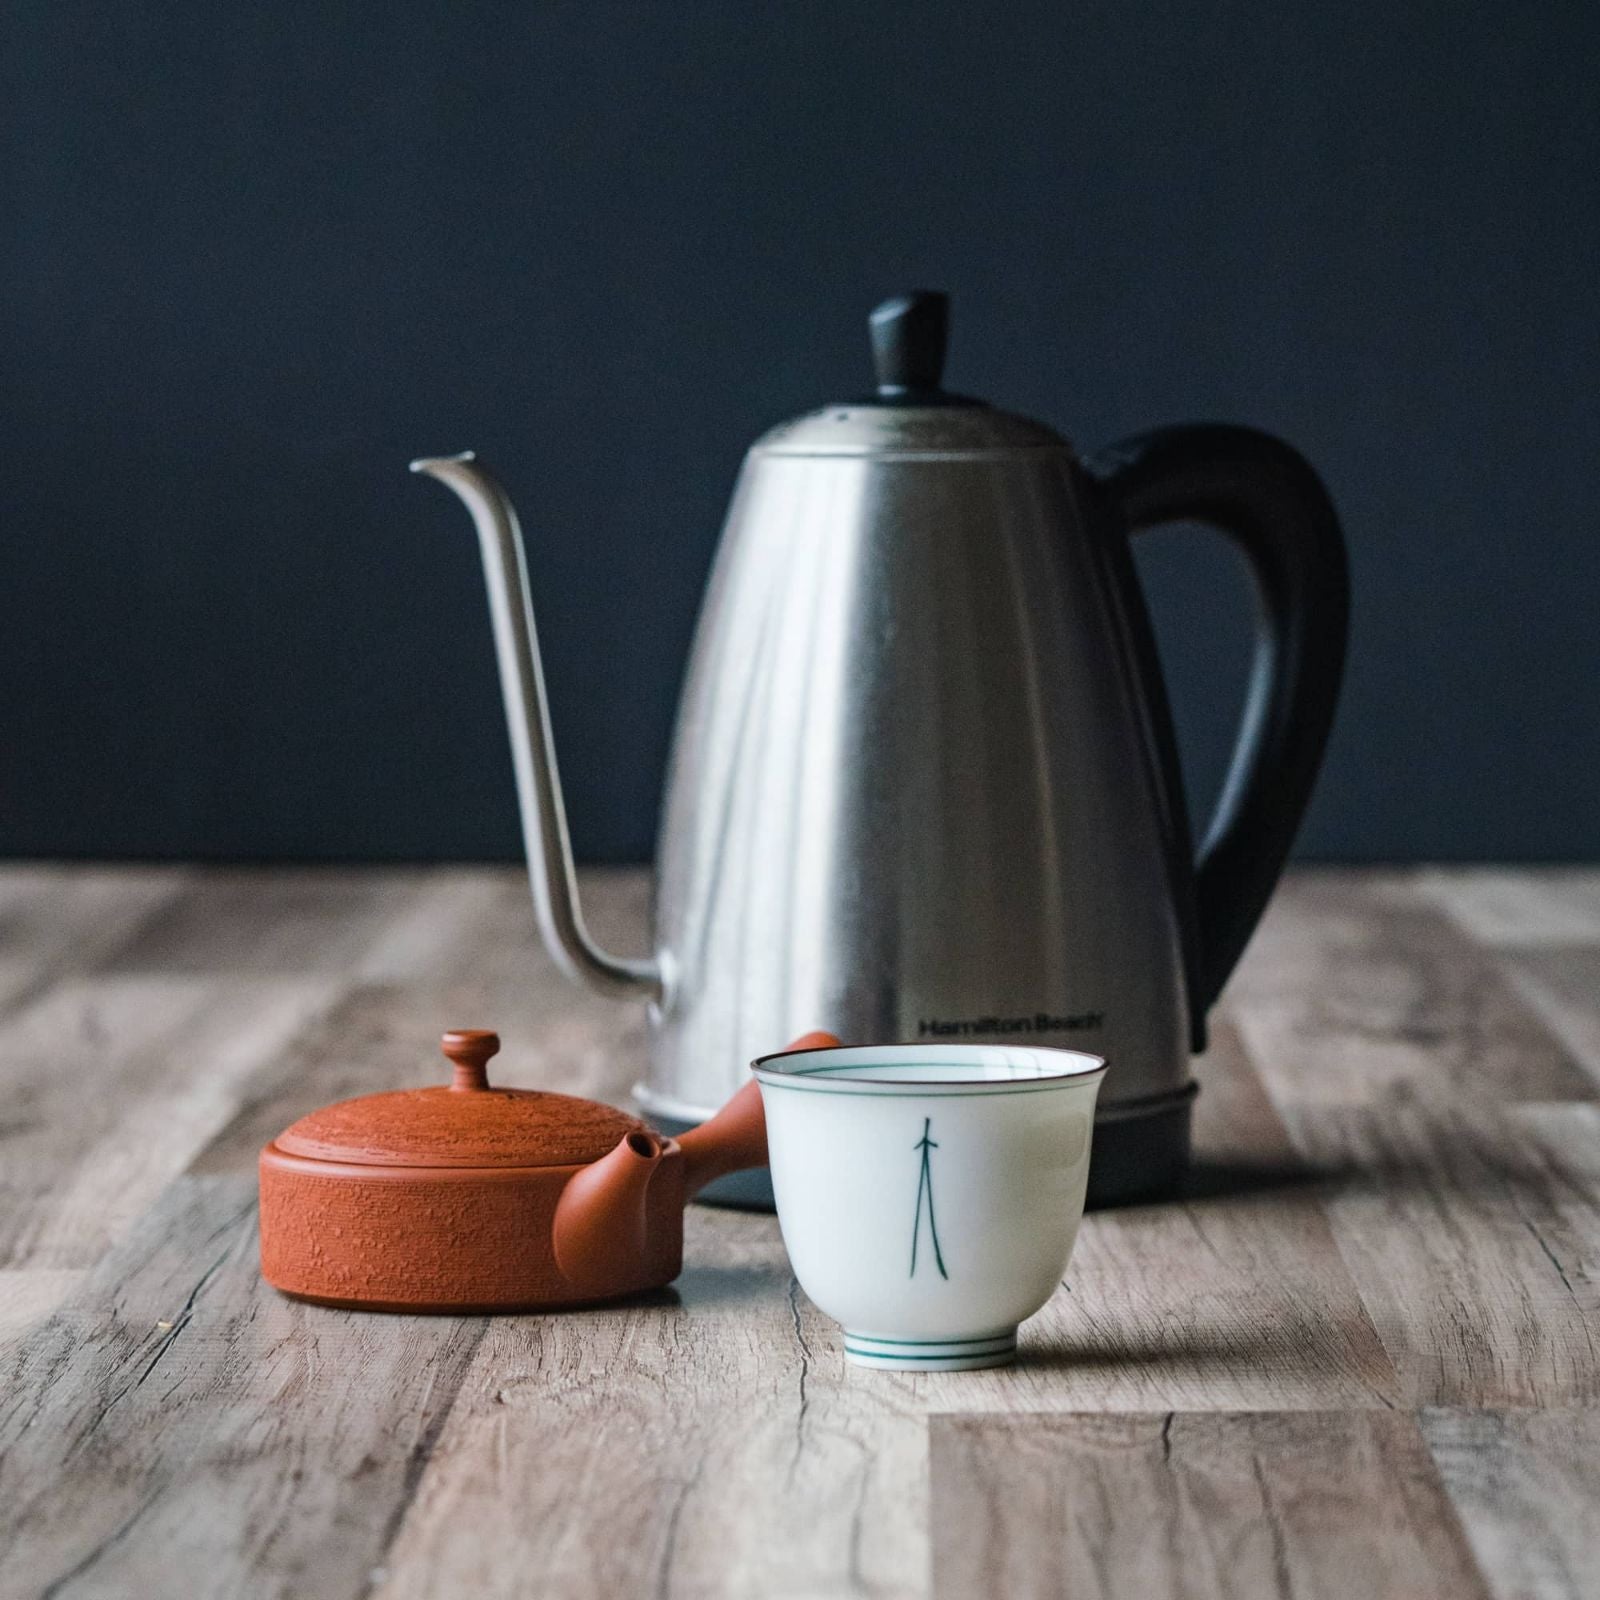 The Best Temperature-controlled Gooseneck Kettles for Tea